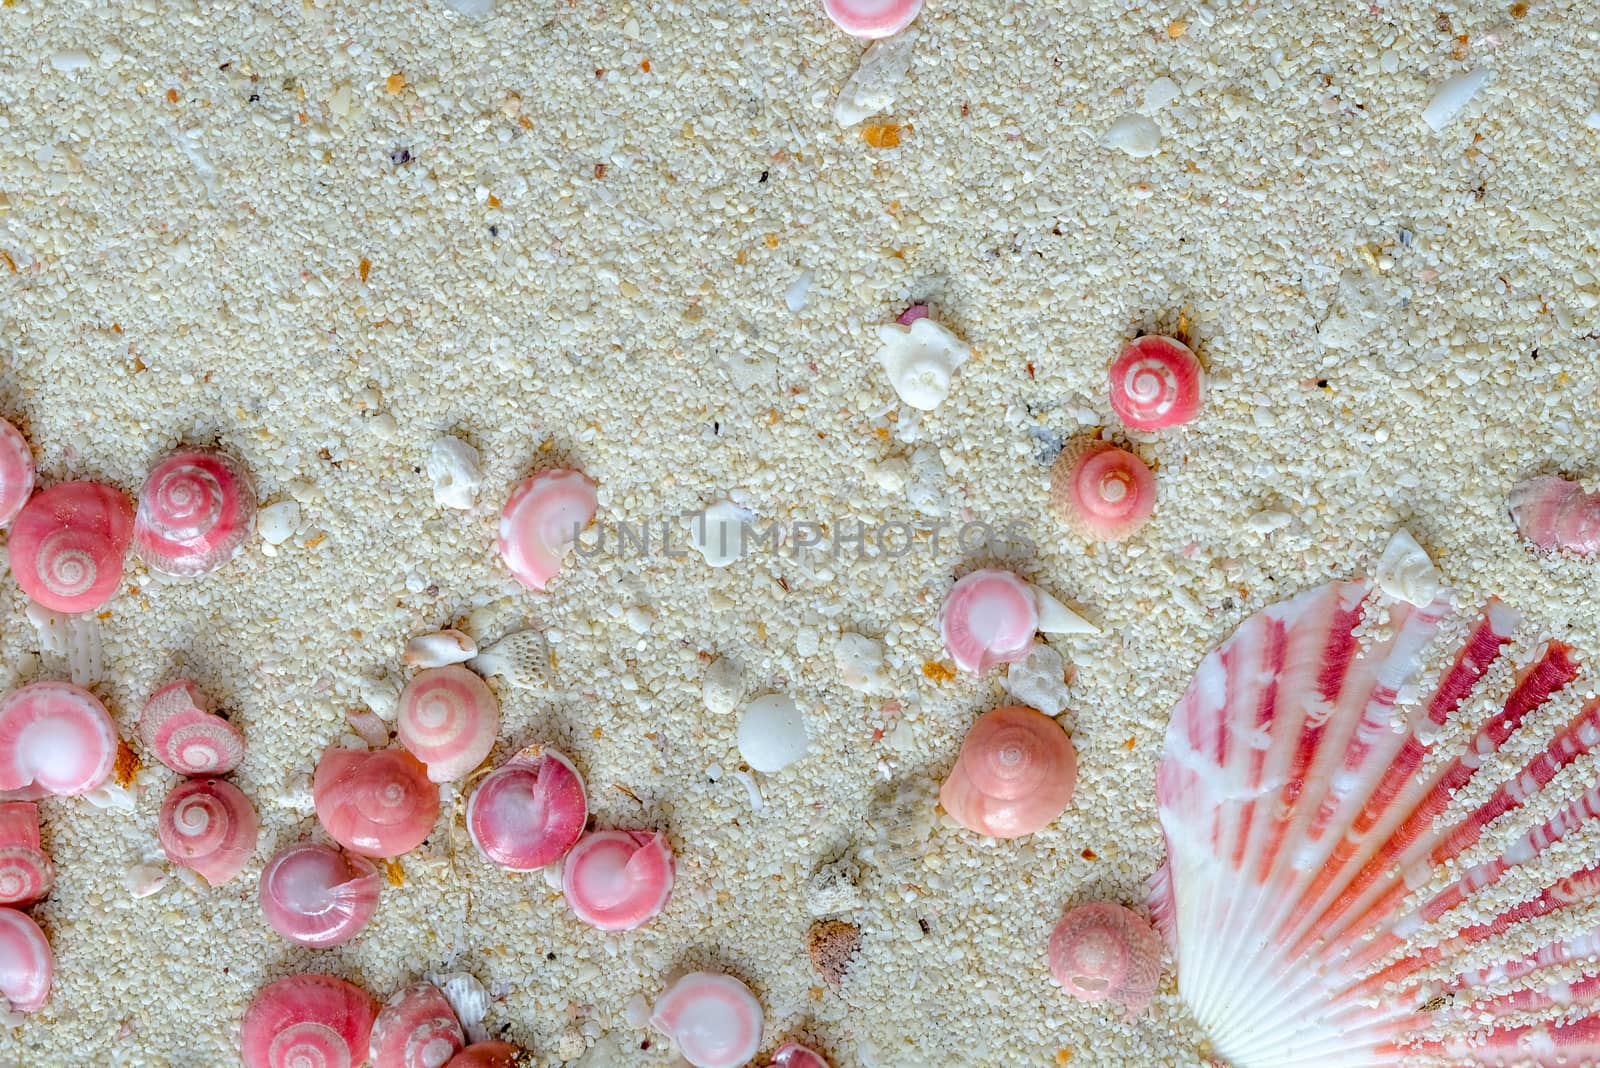 shells of pink button snails (Umbonium vestiarum) and scallop on the sand